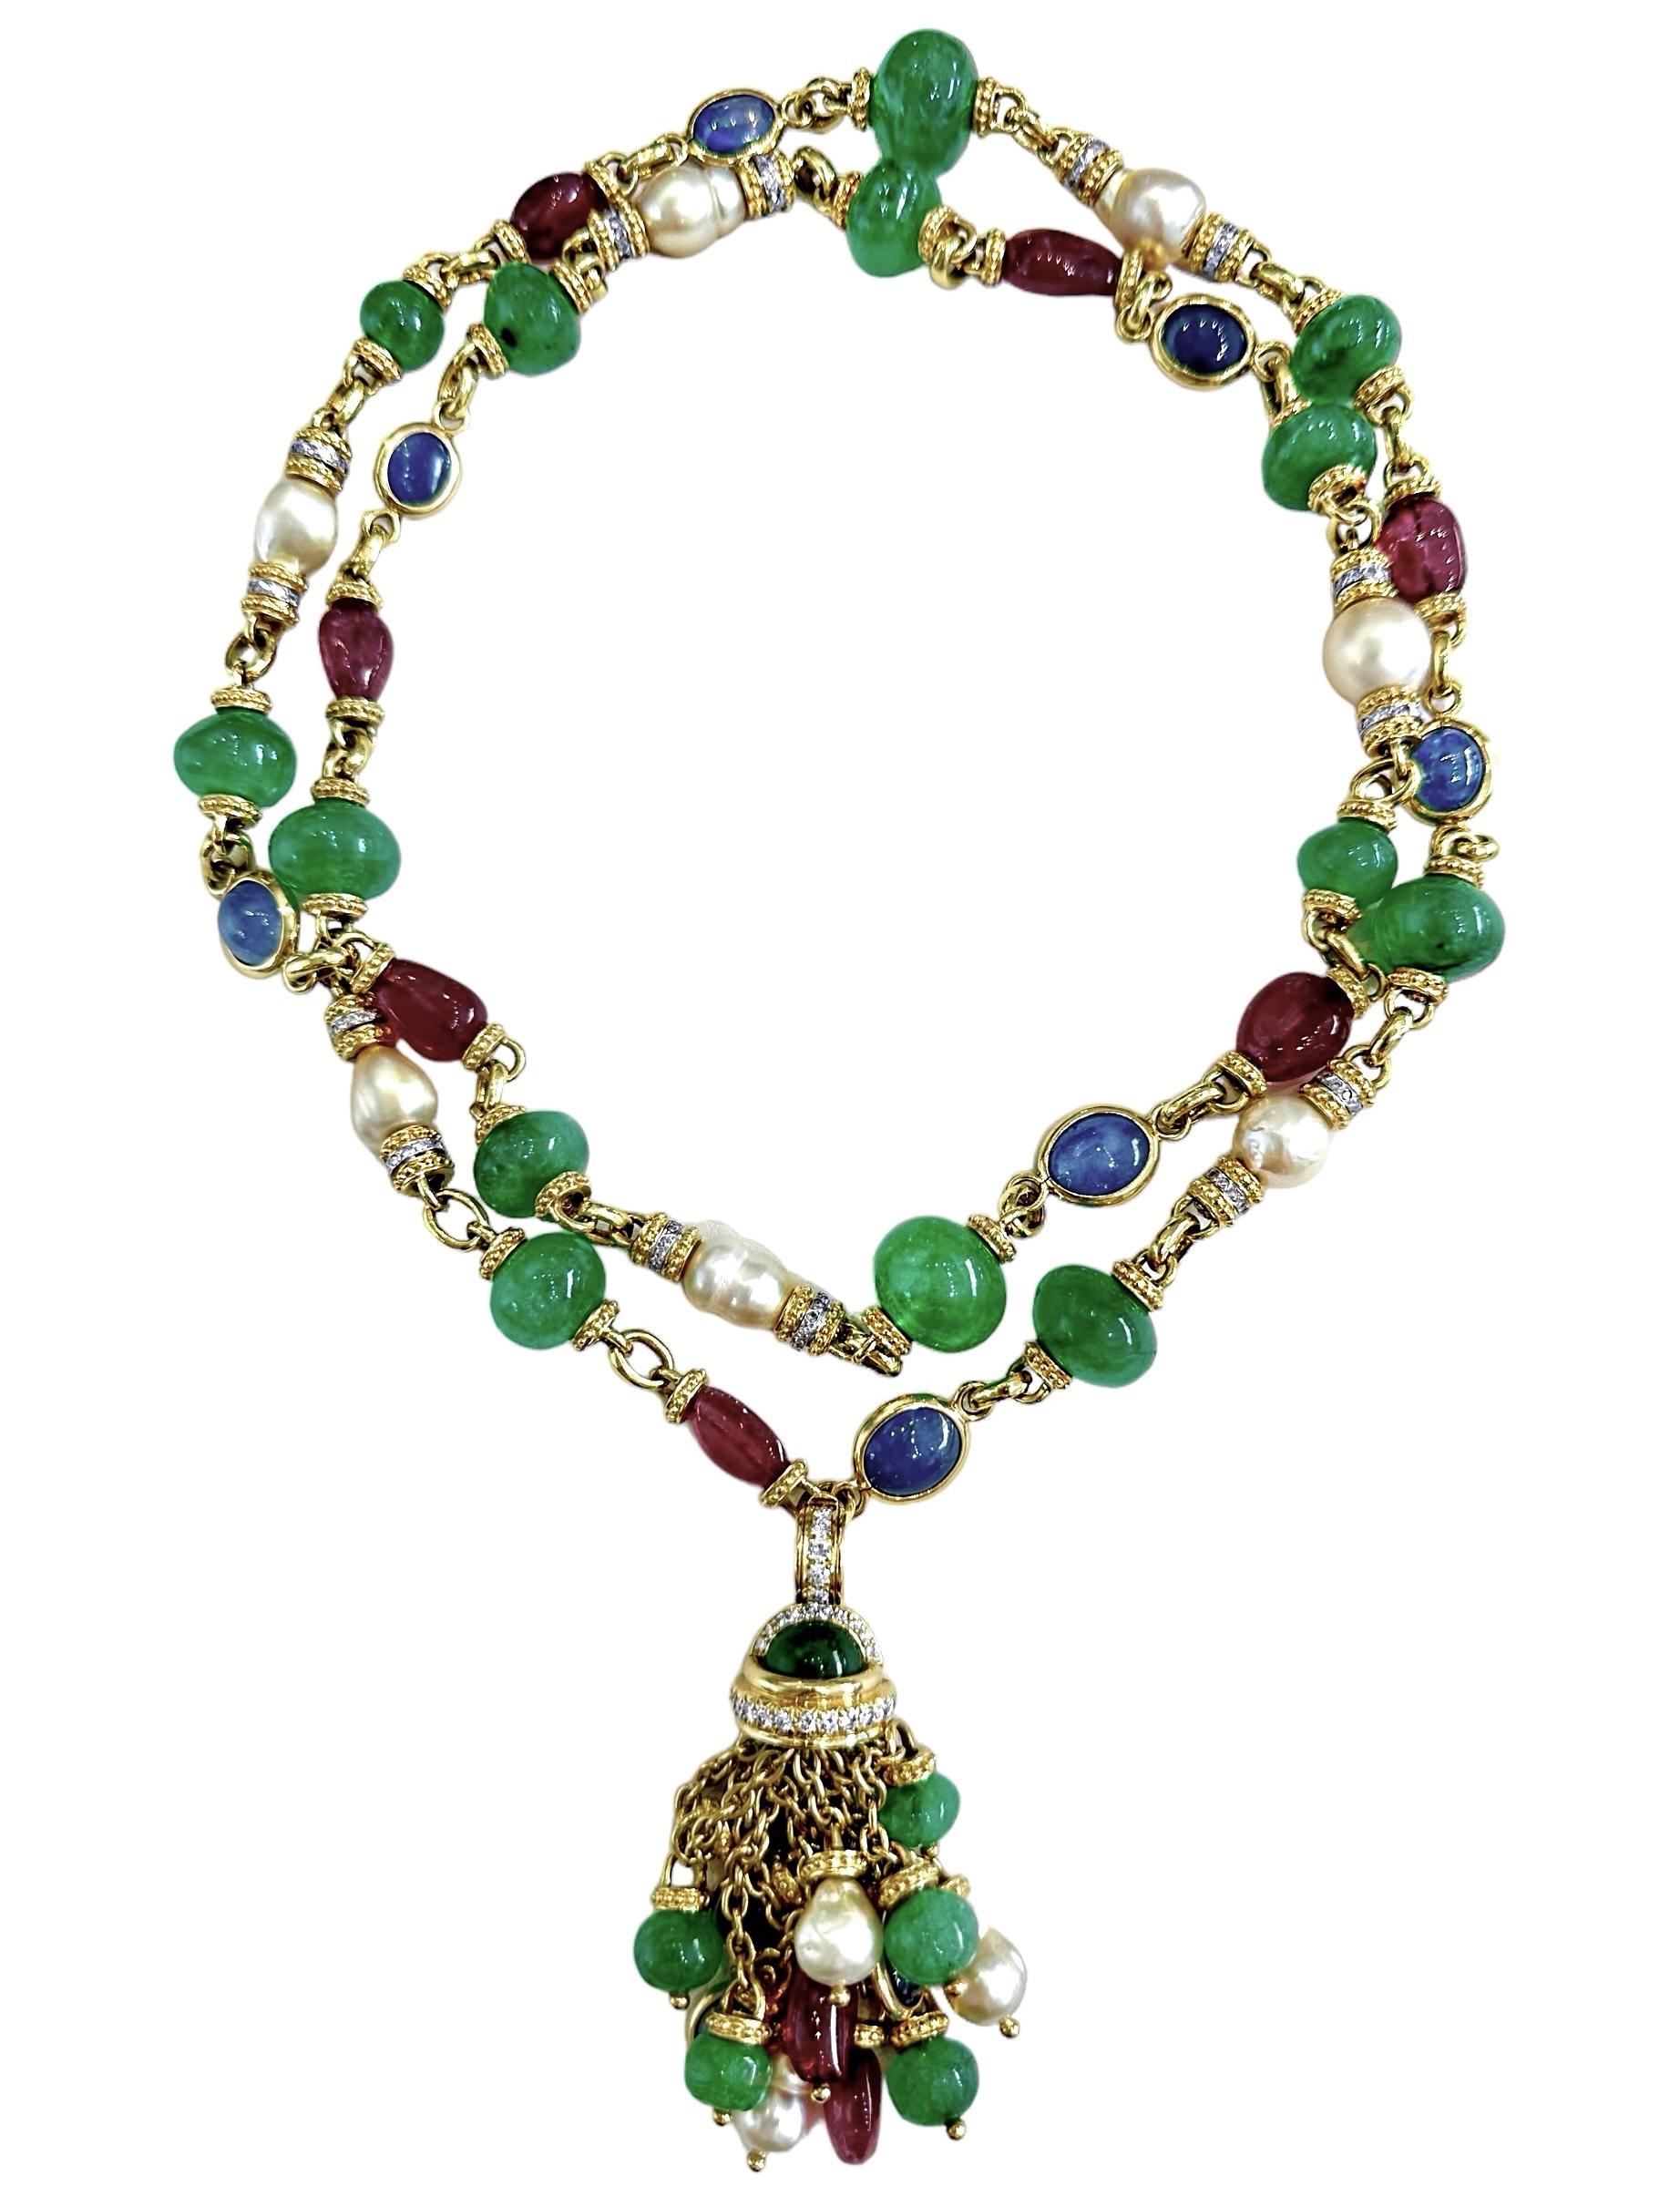 This positively opulent, vintage 18k yellow gold necklace by designer Tambetti, is set with a total of forty eight big and bold ruby, emerald and sapphire cabochons beads as well as dozens of scintillating diamonds and large pearls. The necklace